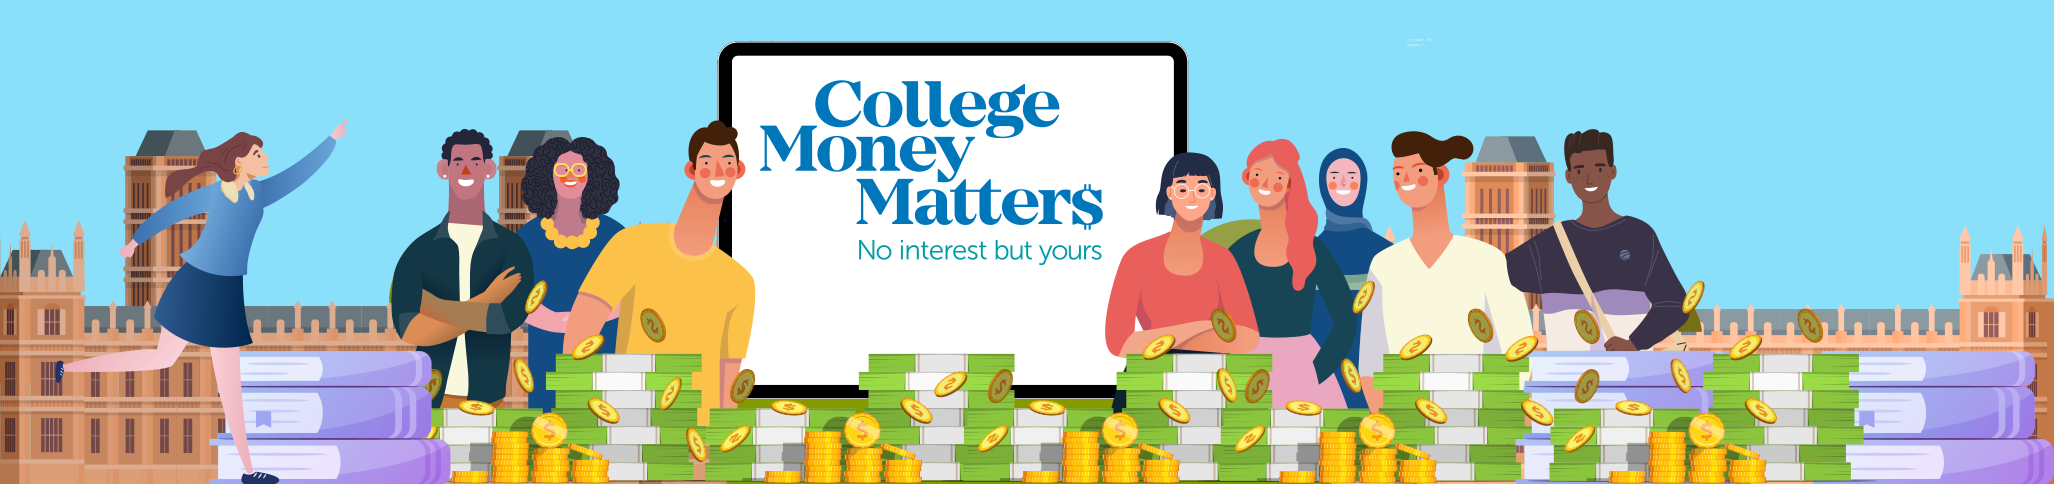 About College Money Matters